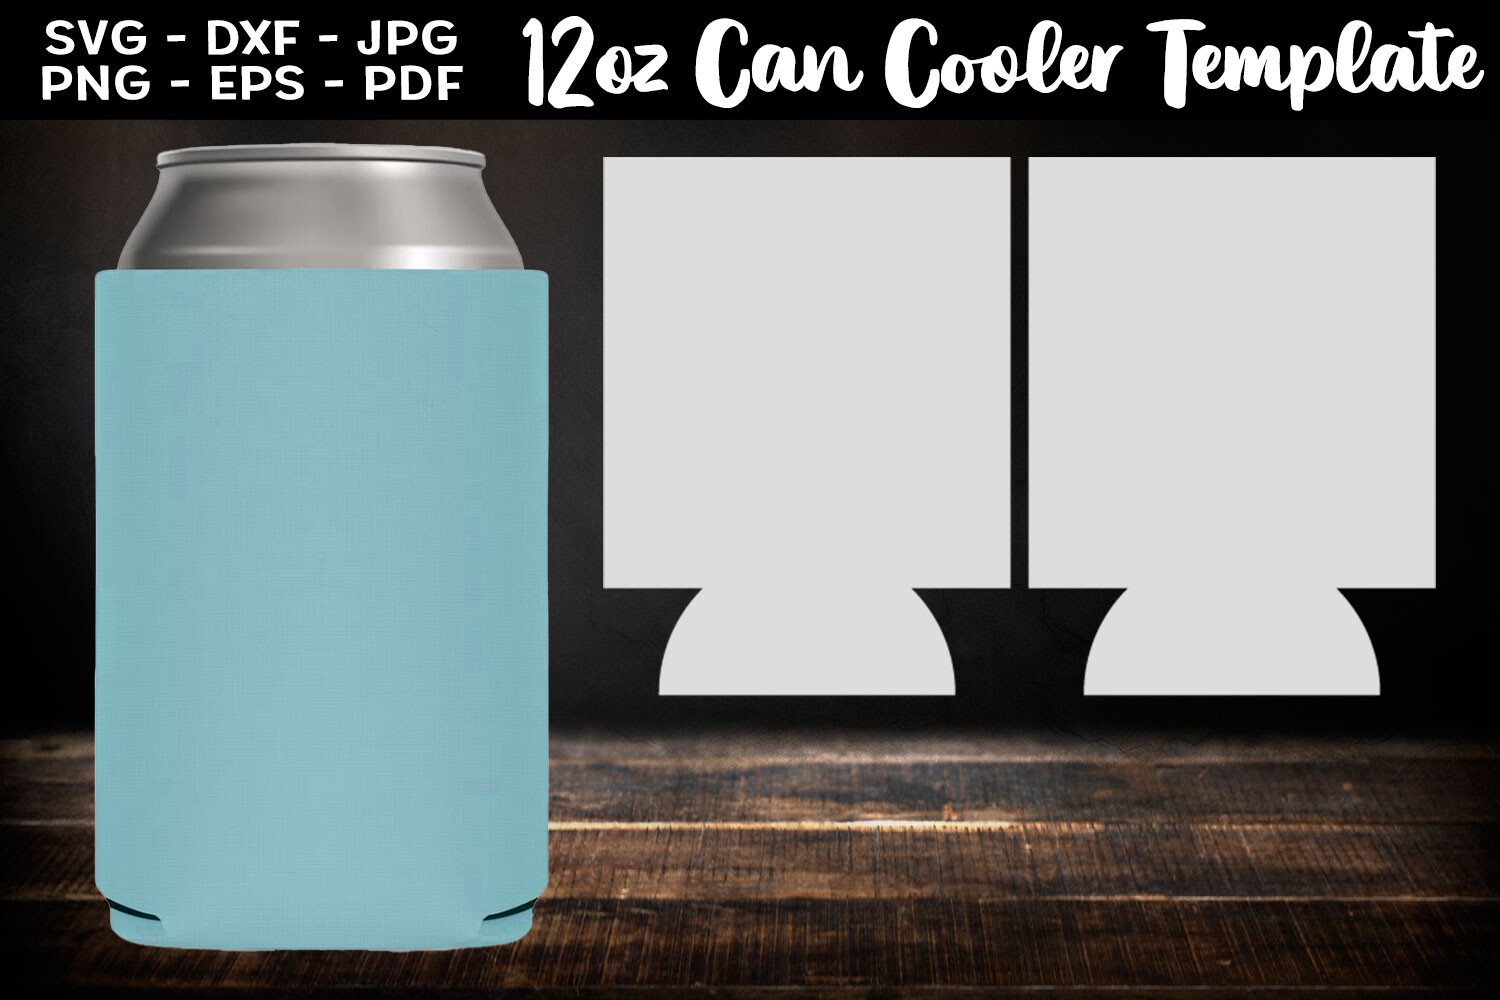 https://www.creativefabrica.com/wp-content/uploads/2023/08/25/12oz-Can-Cooler-Template-SVG-PNG-Graphics-77710011-1.jpg